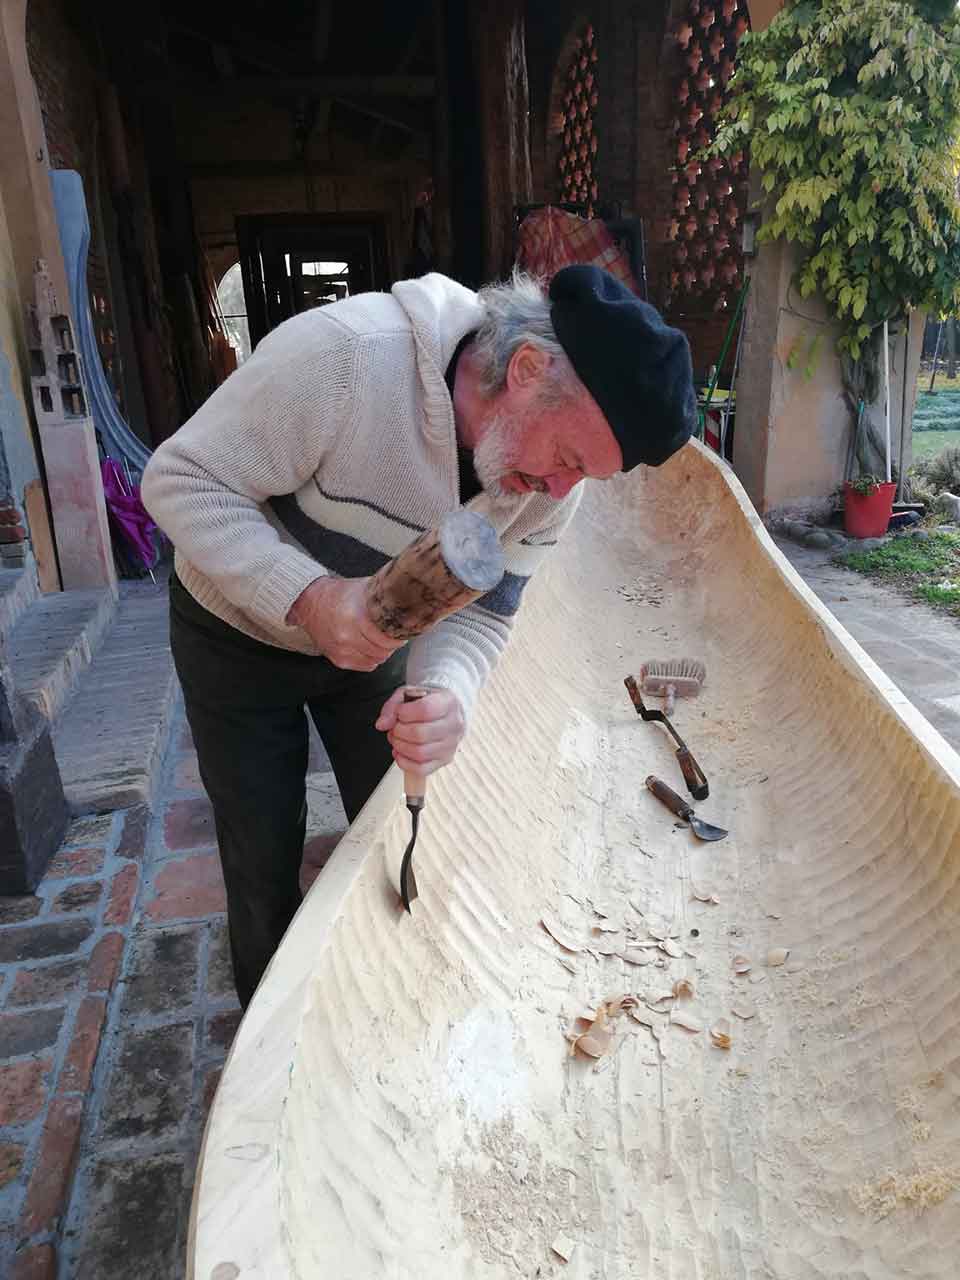 A photograph of a man chiseling out a canoe